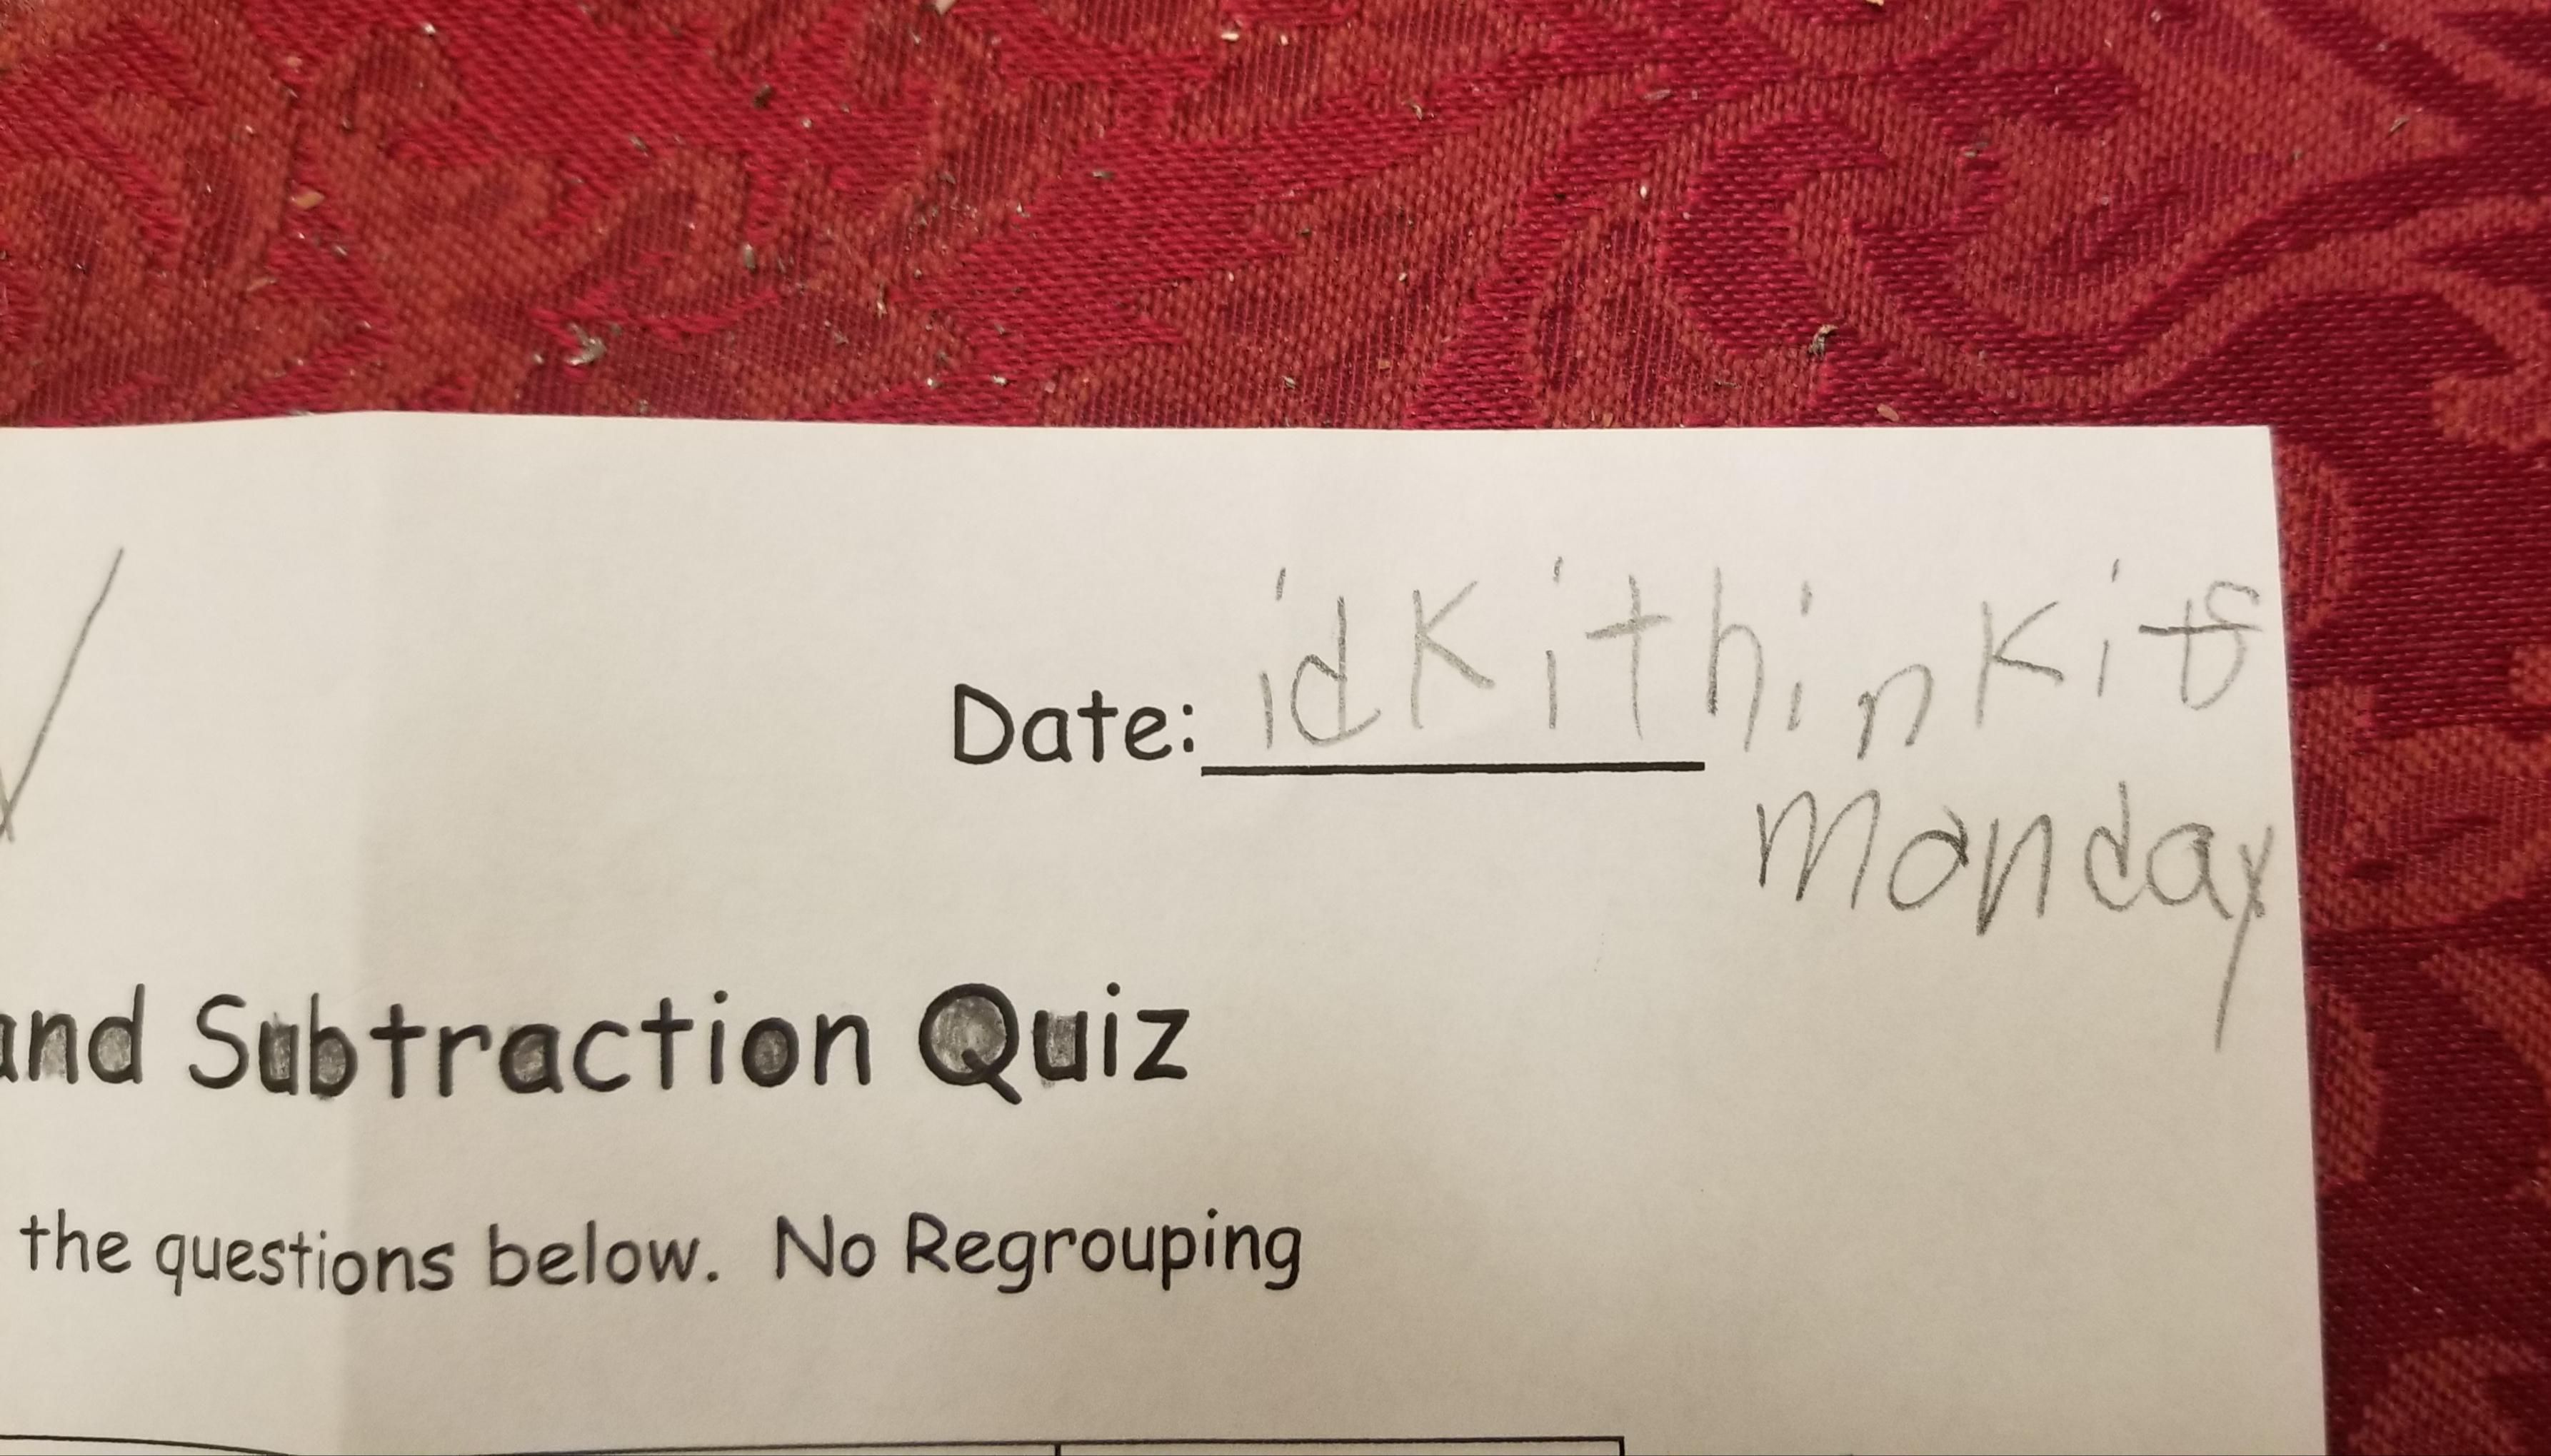 Spotted on my 10 year old daughter's math quiz. Date: idk i think it's monday